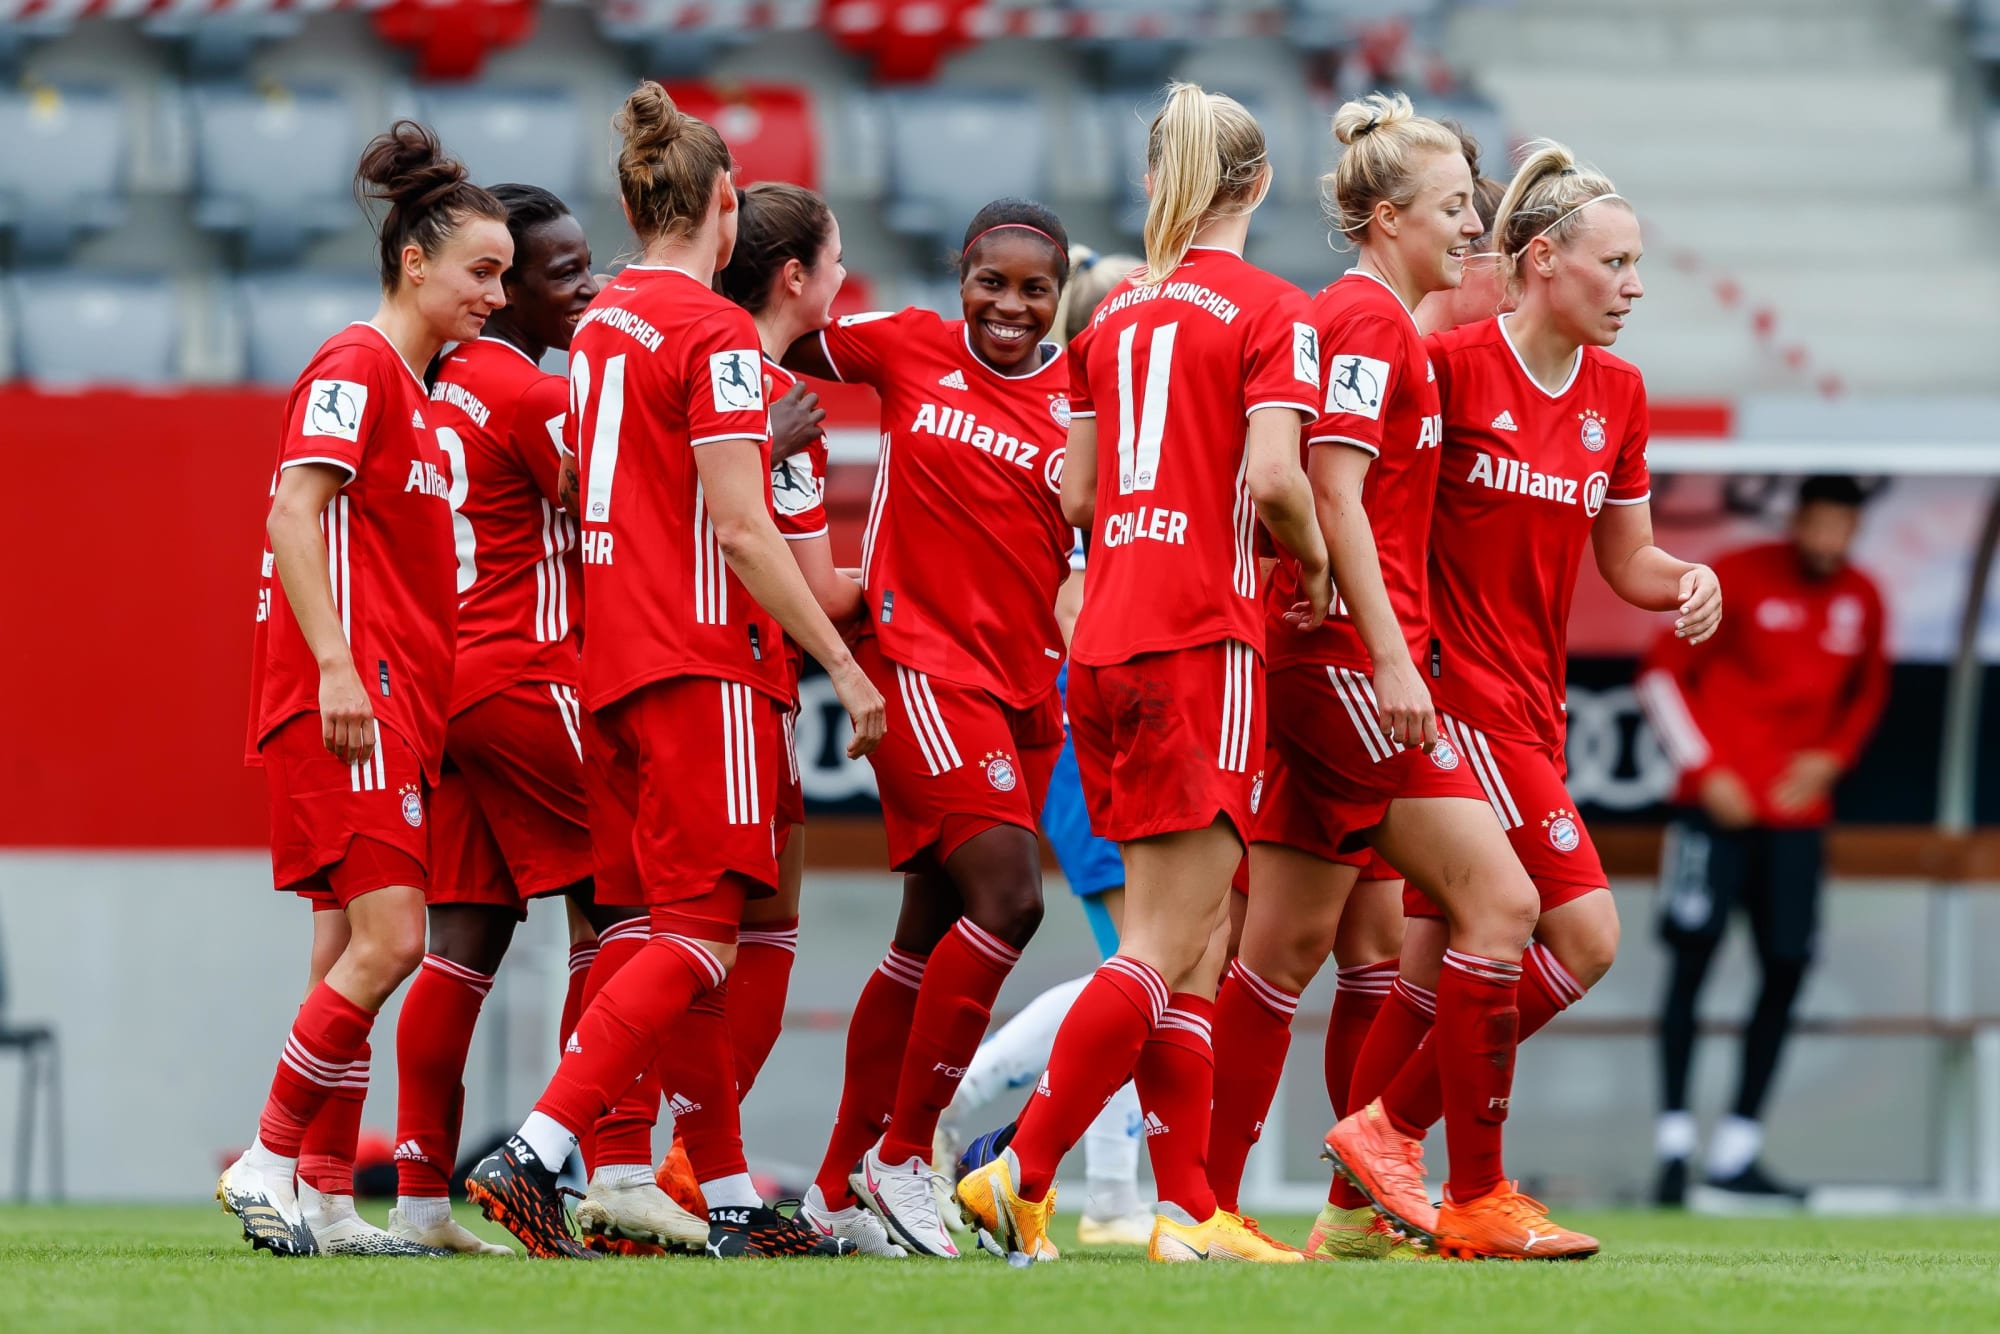 FC Bayern Munich Frauen is off to a perfect start to the season